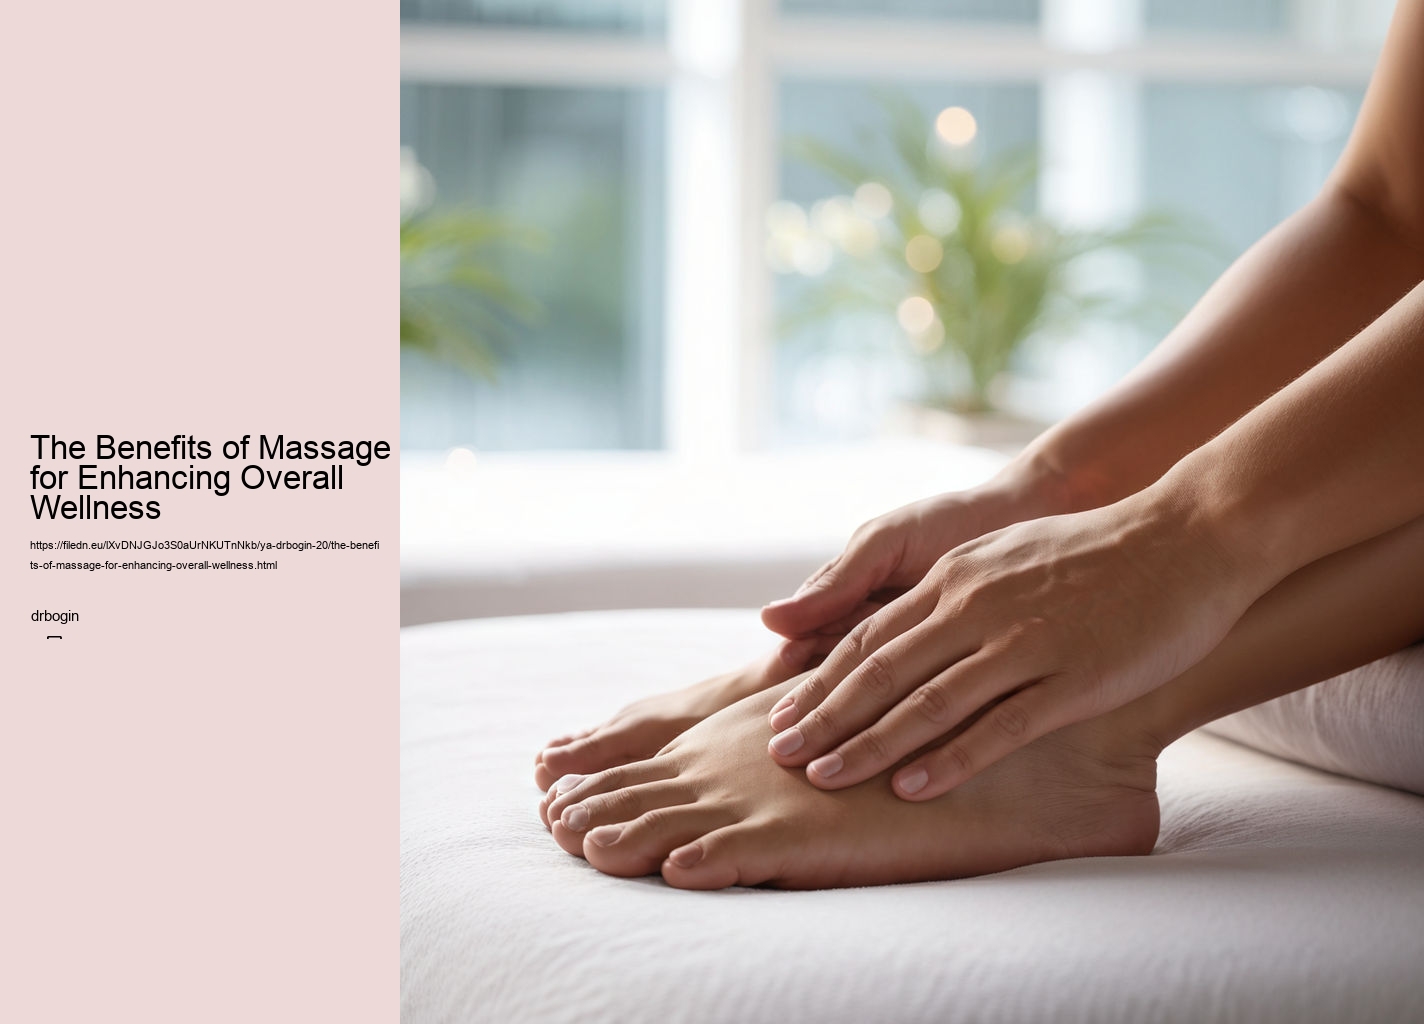 The Benefits of Massage for Enhancing Overall Wellness